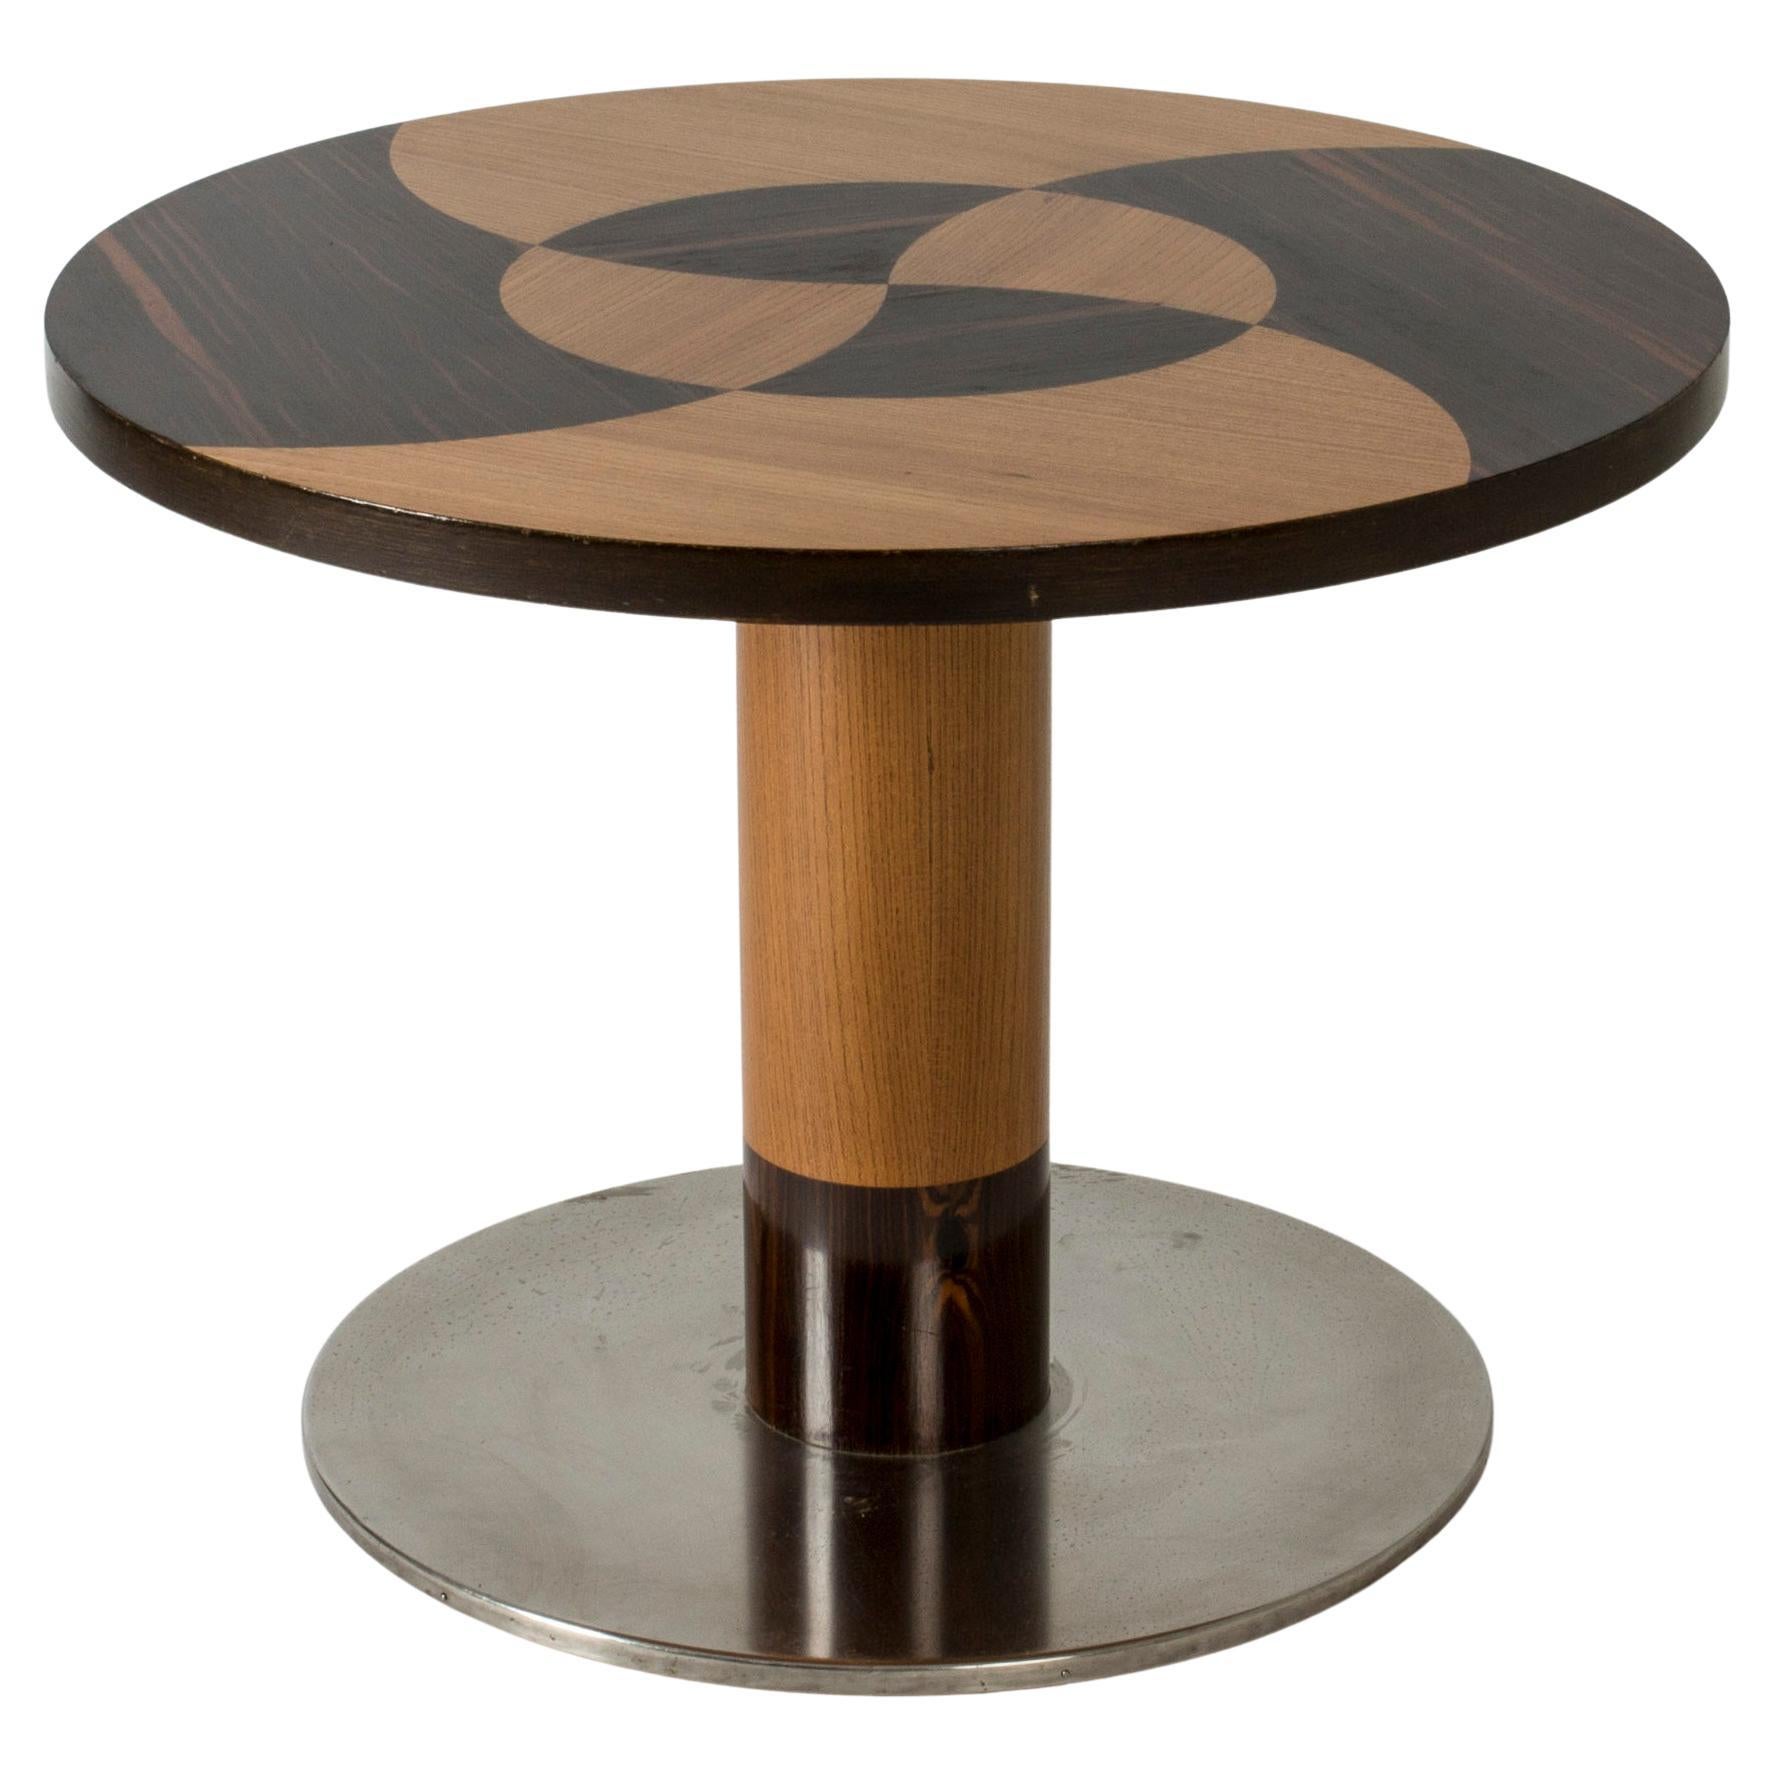 1940s Swedish Modern Coffee table by Otto Schulz for Boet, Sweden, 1930s